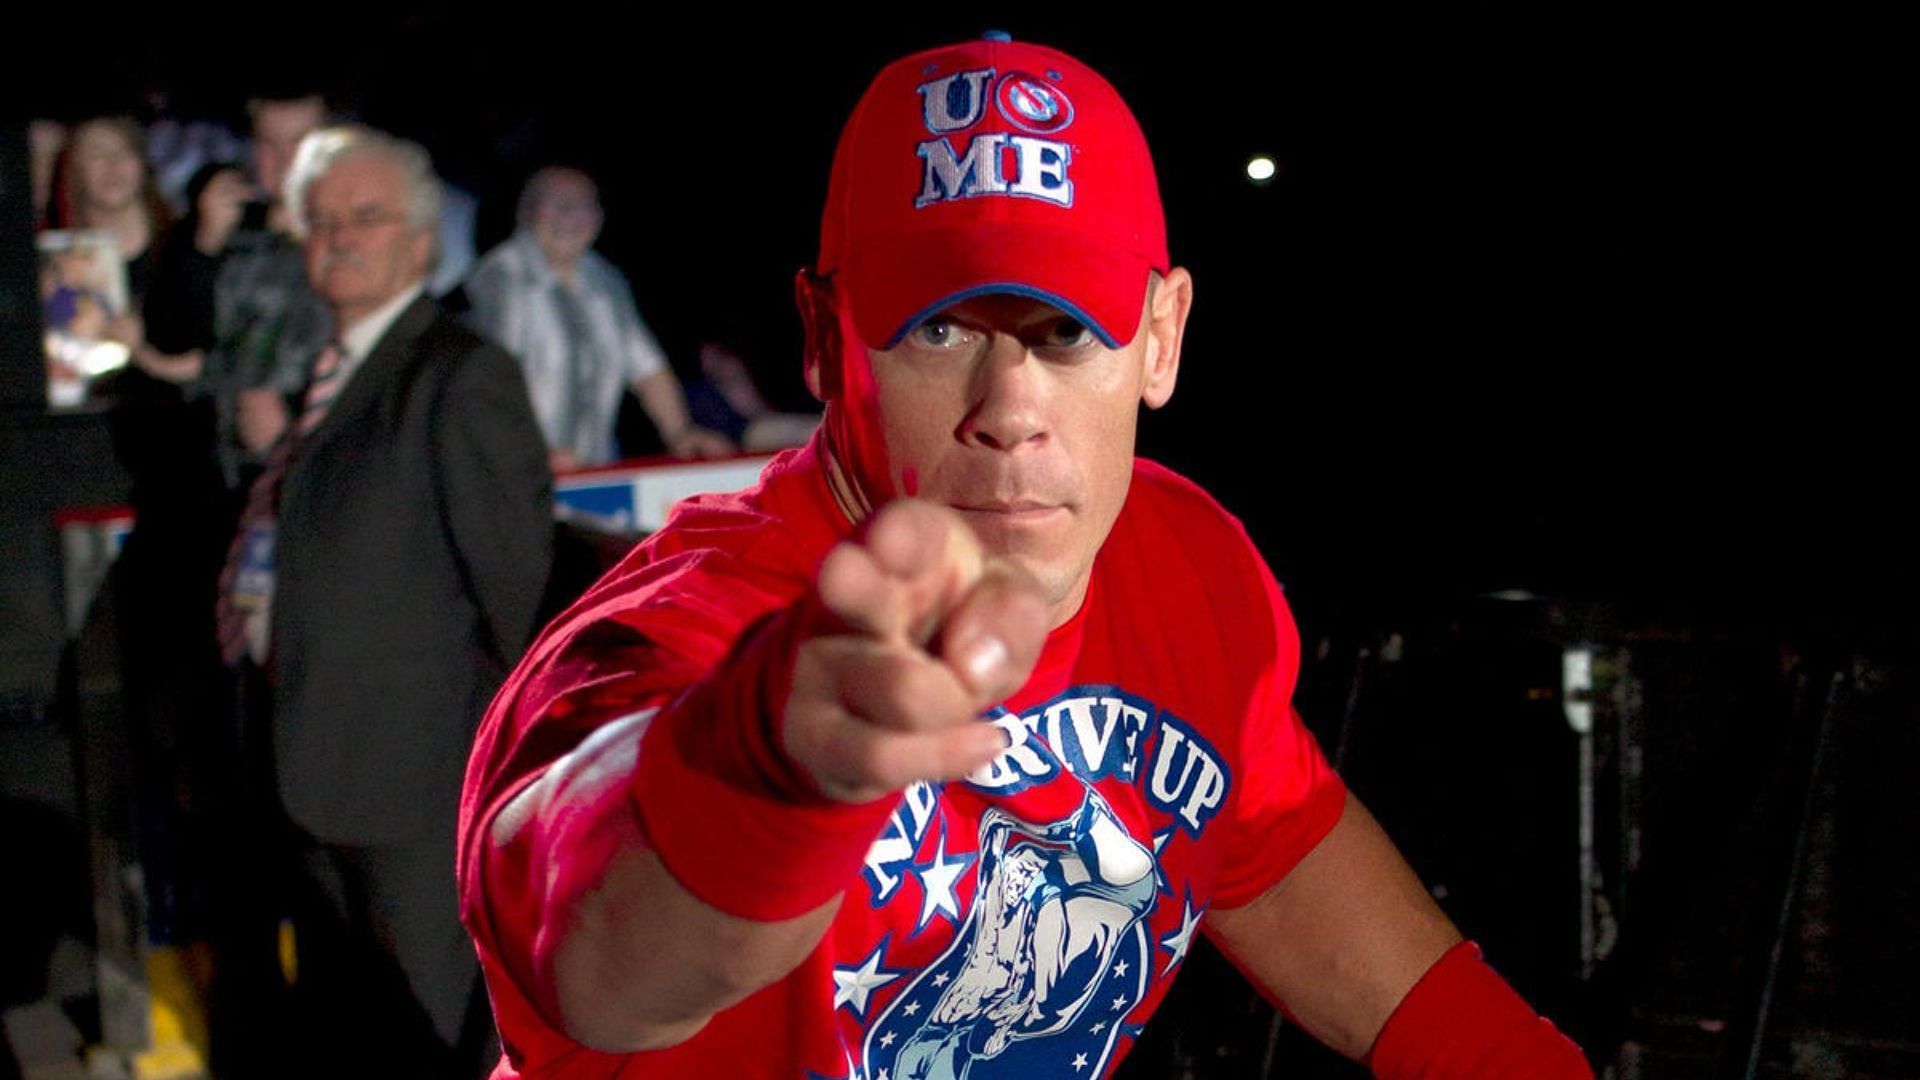 John Cena is one of the most iconic WWE figures